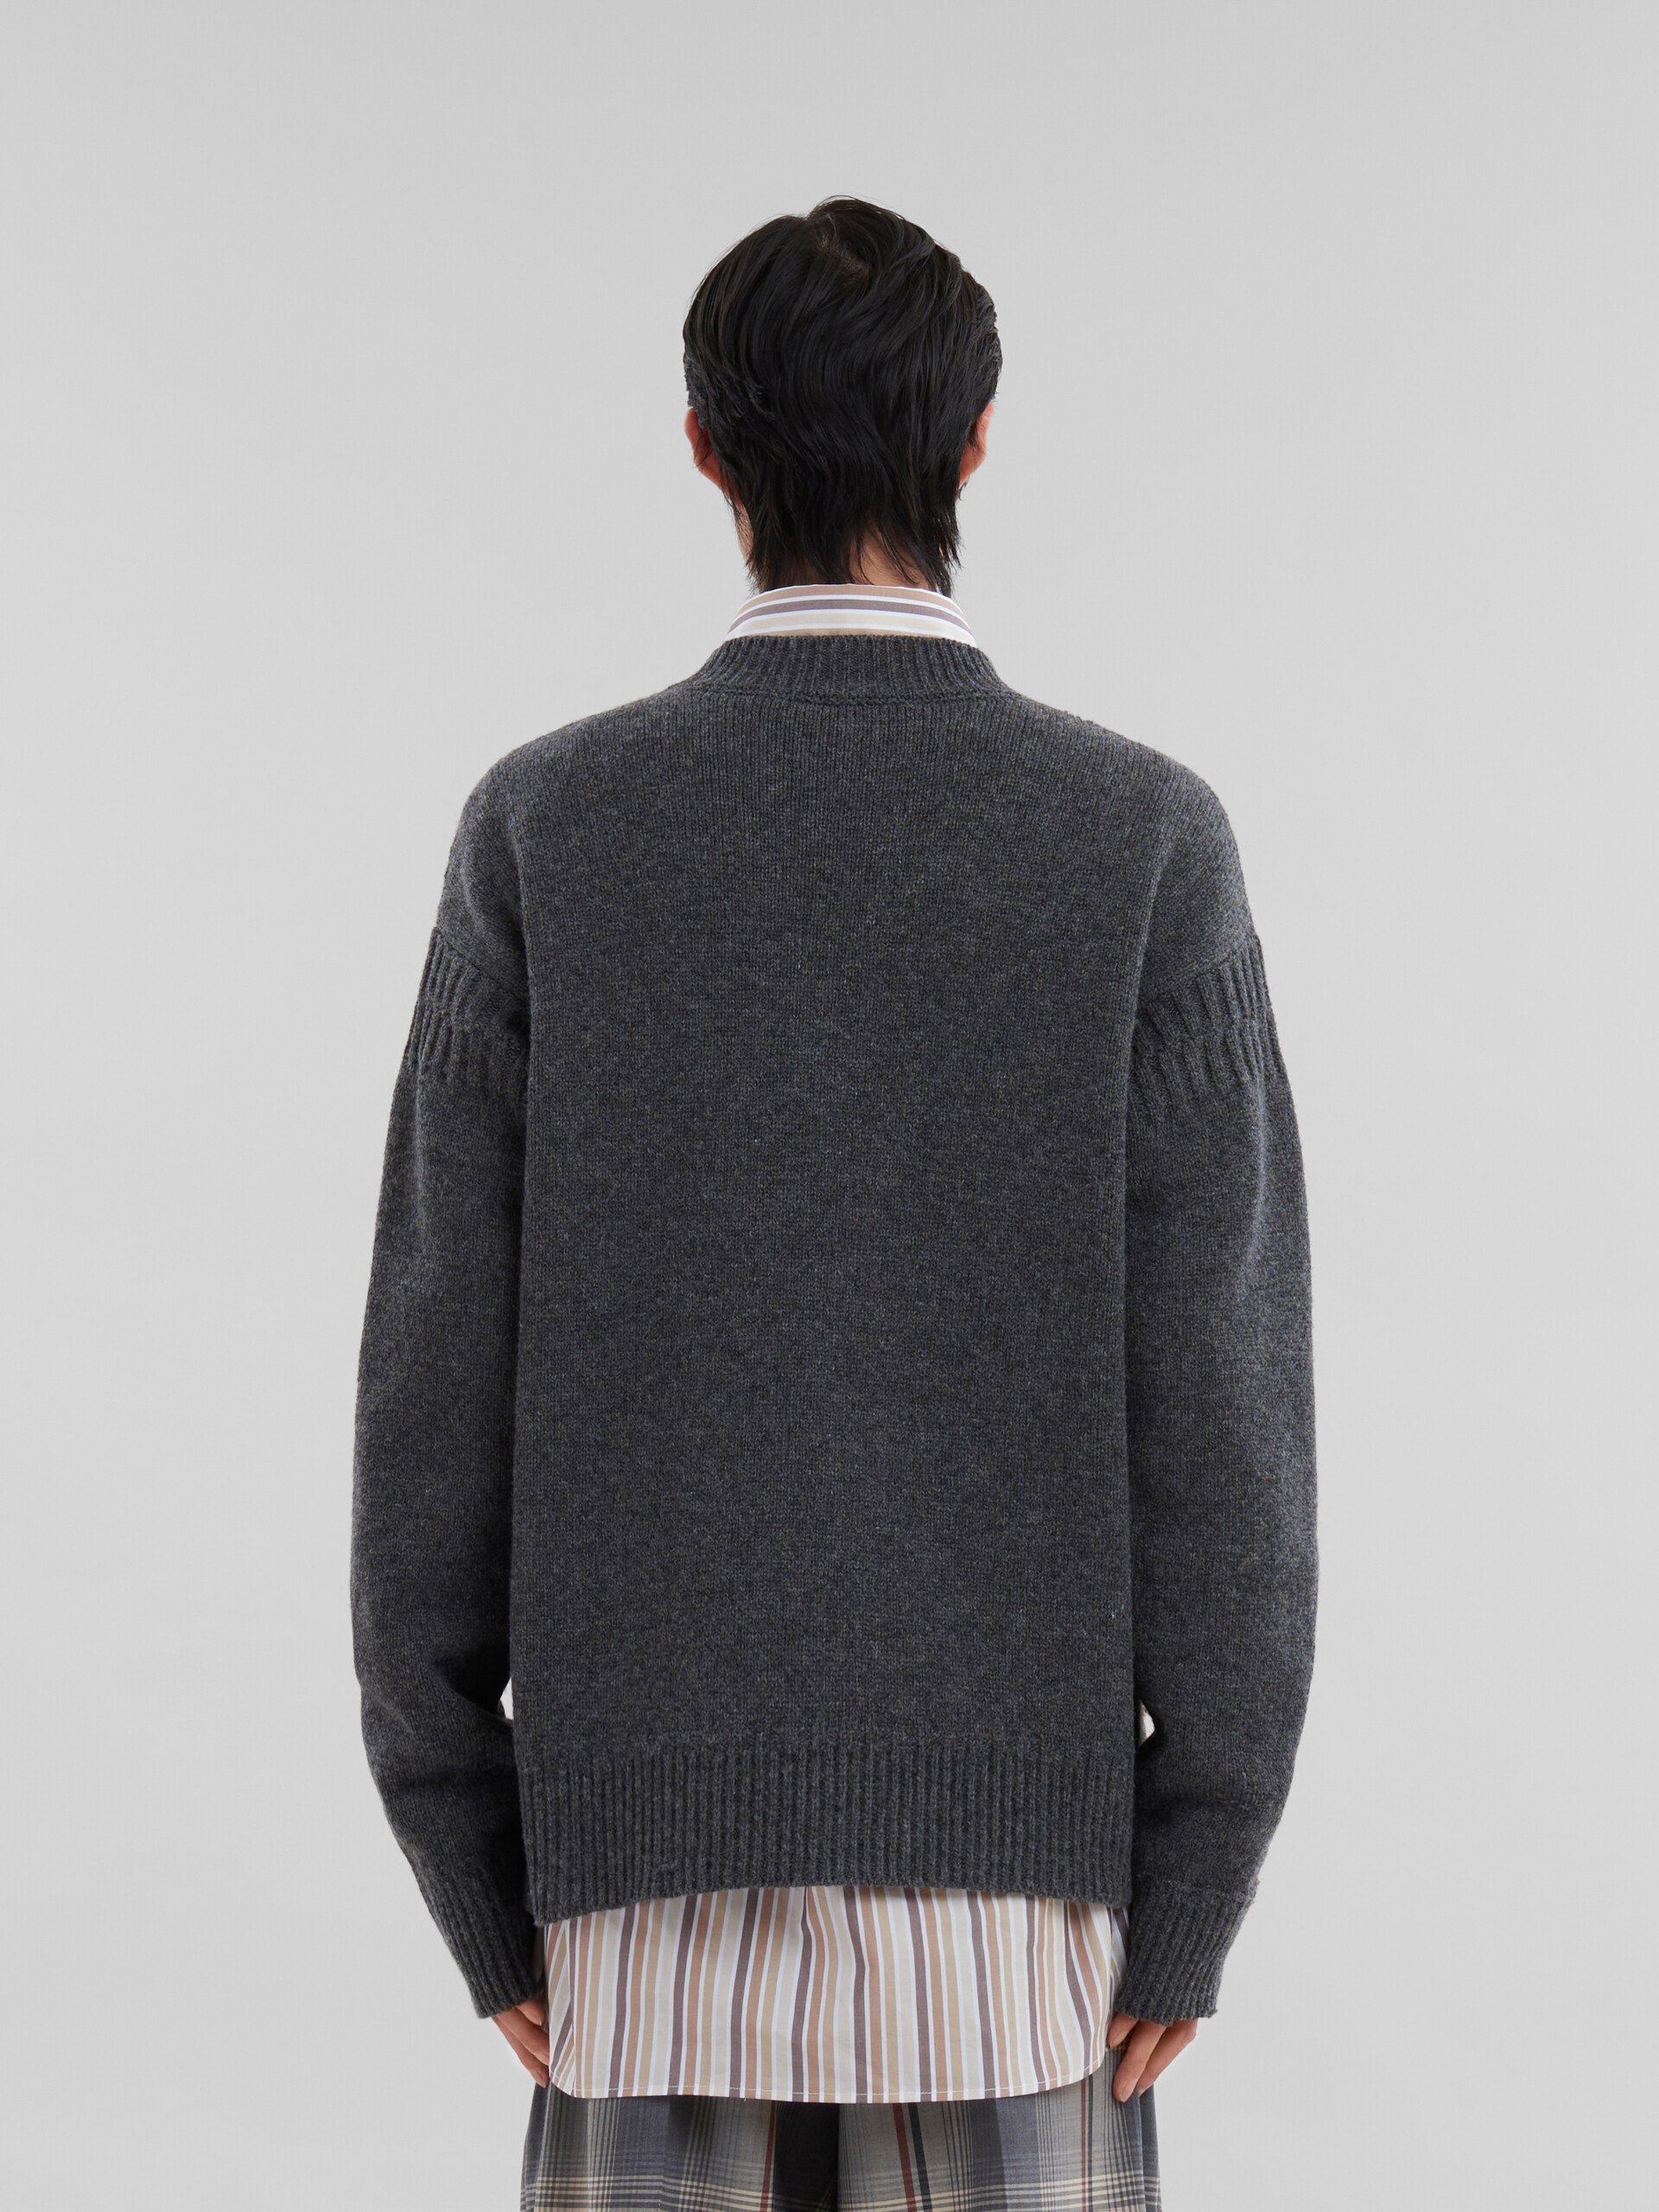 Grey Shetland wool jumper with Marni mending patches - Pullovers - Image 3